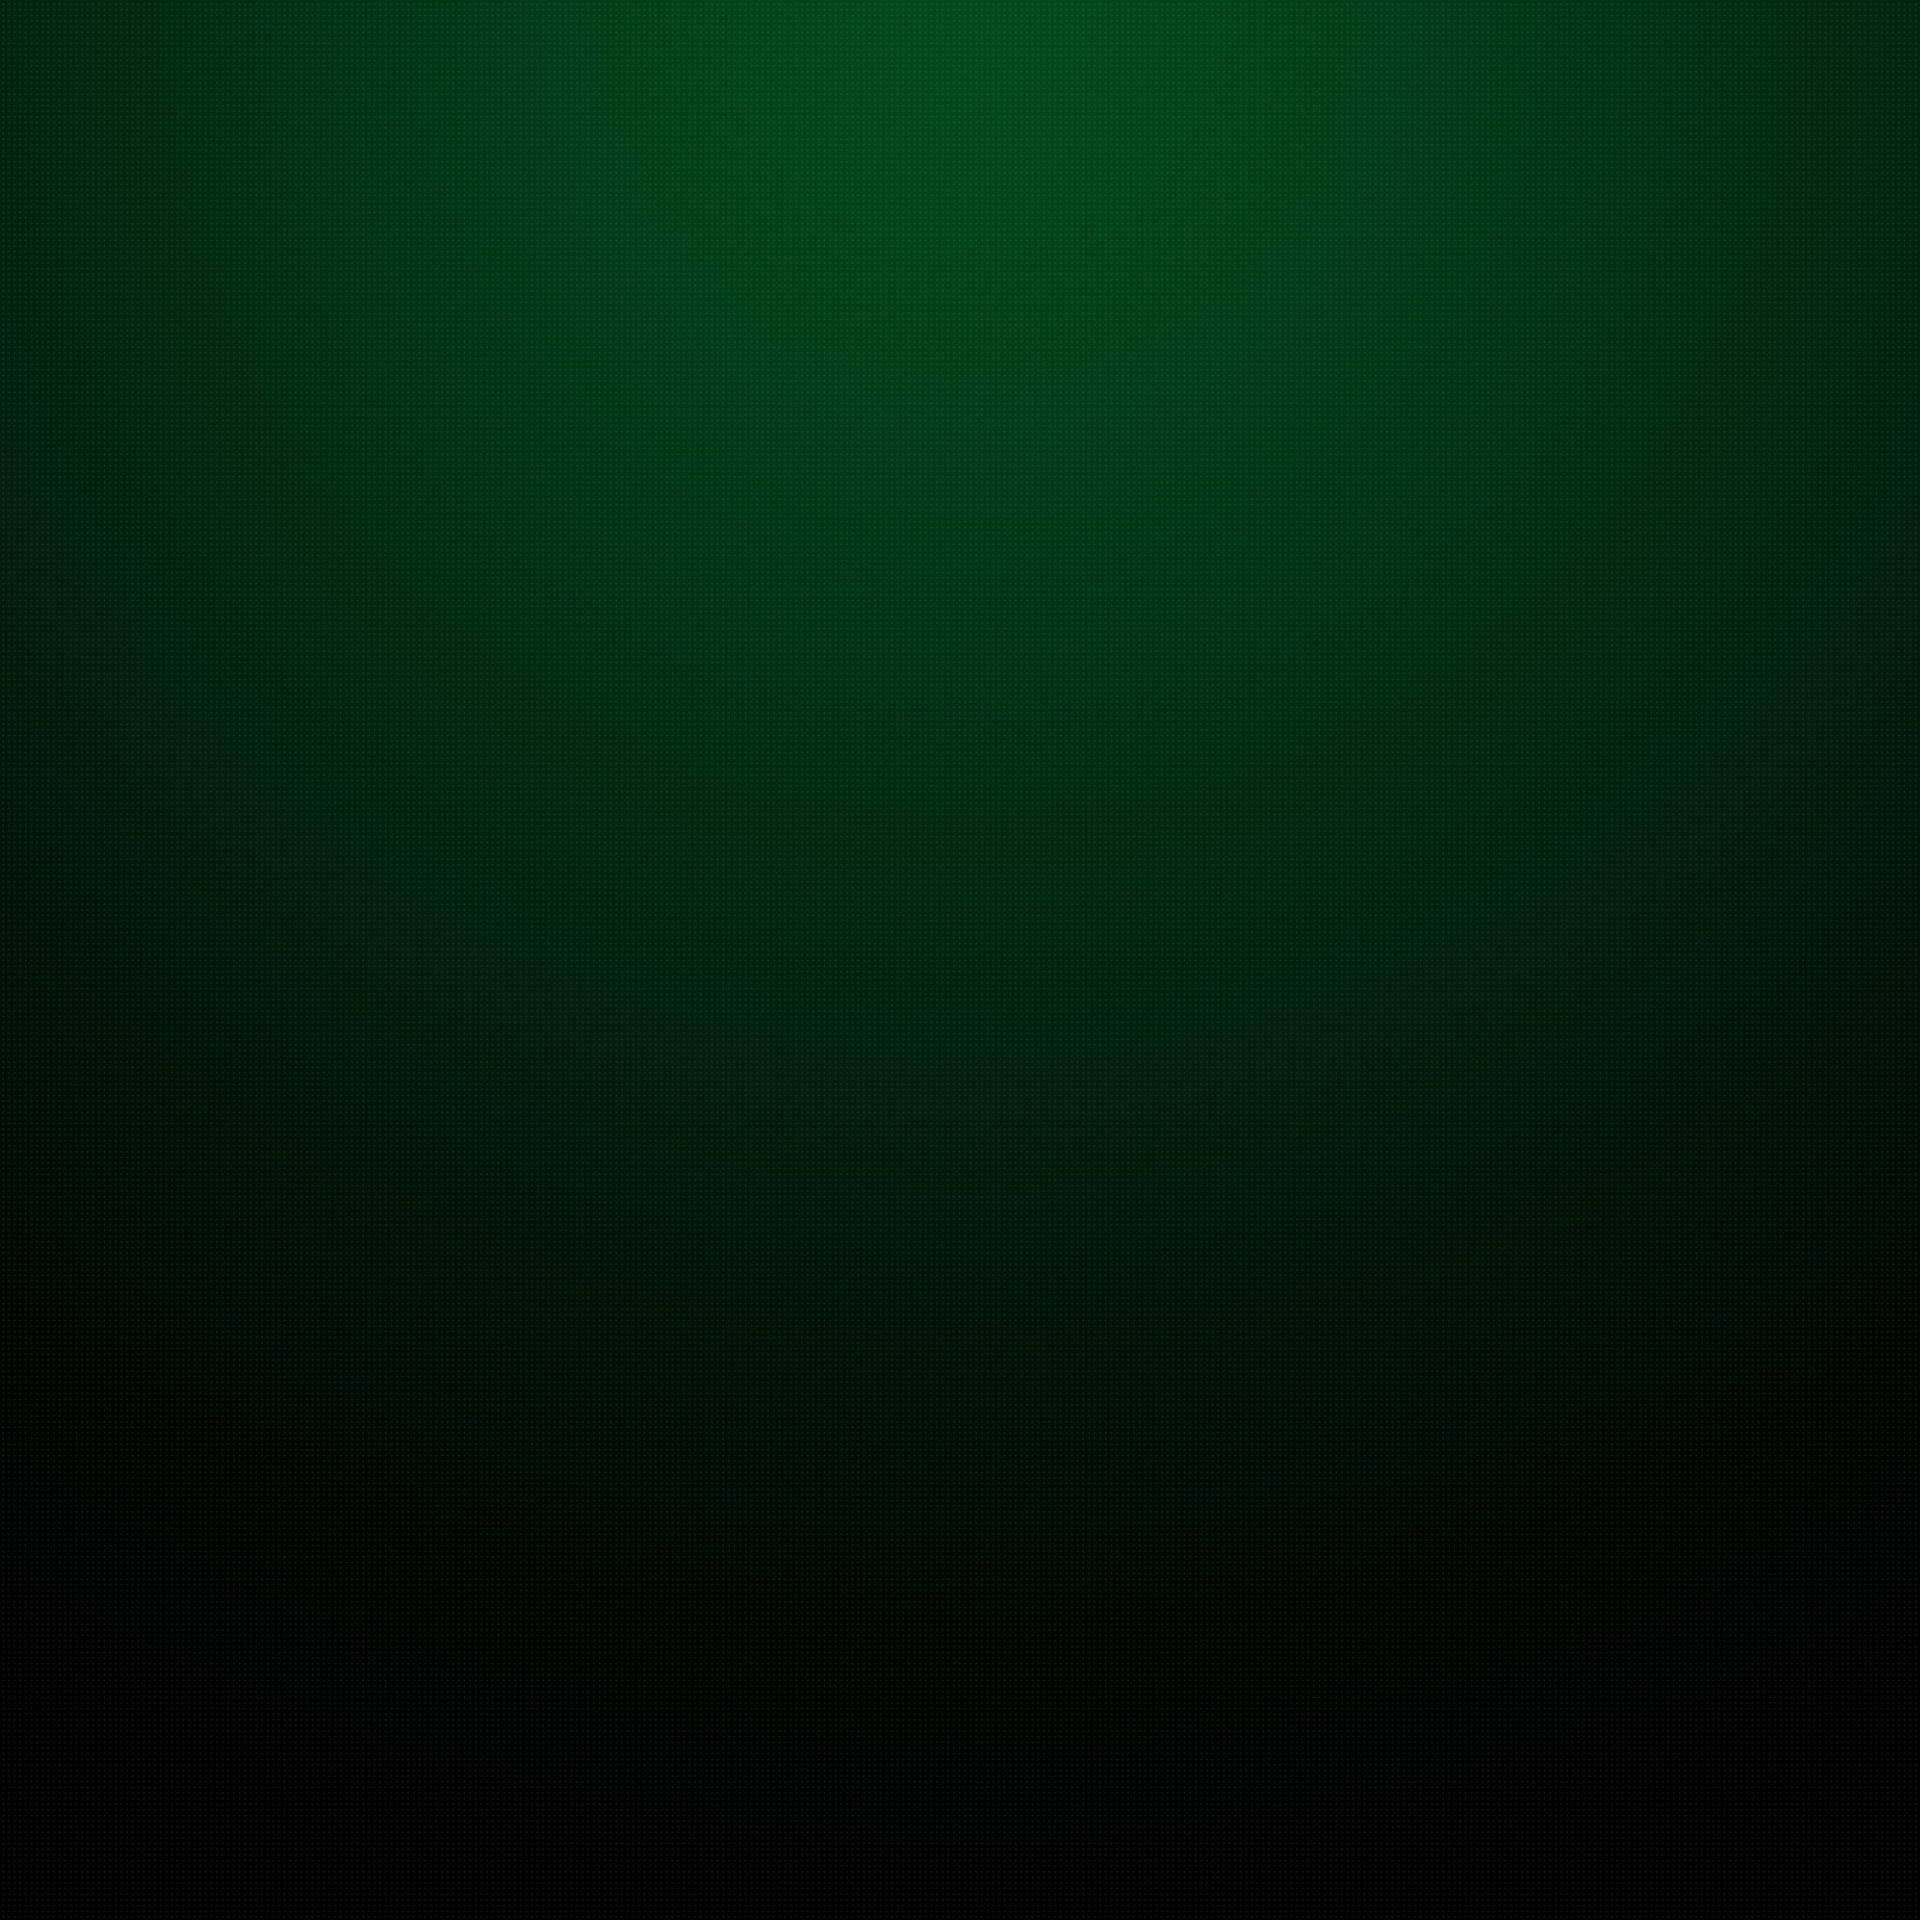 Dark Green 2048X2048 Wallpaper and Background Image